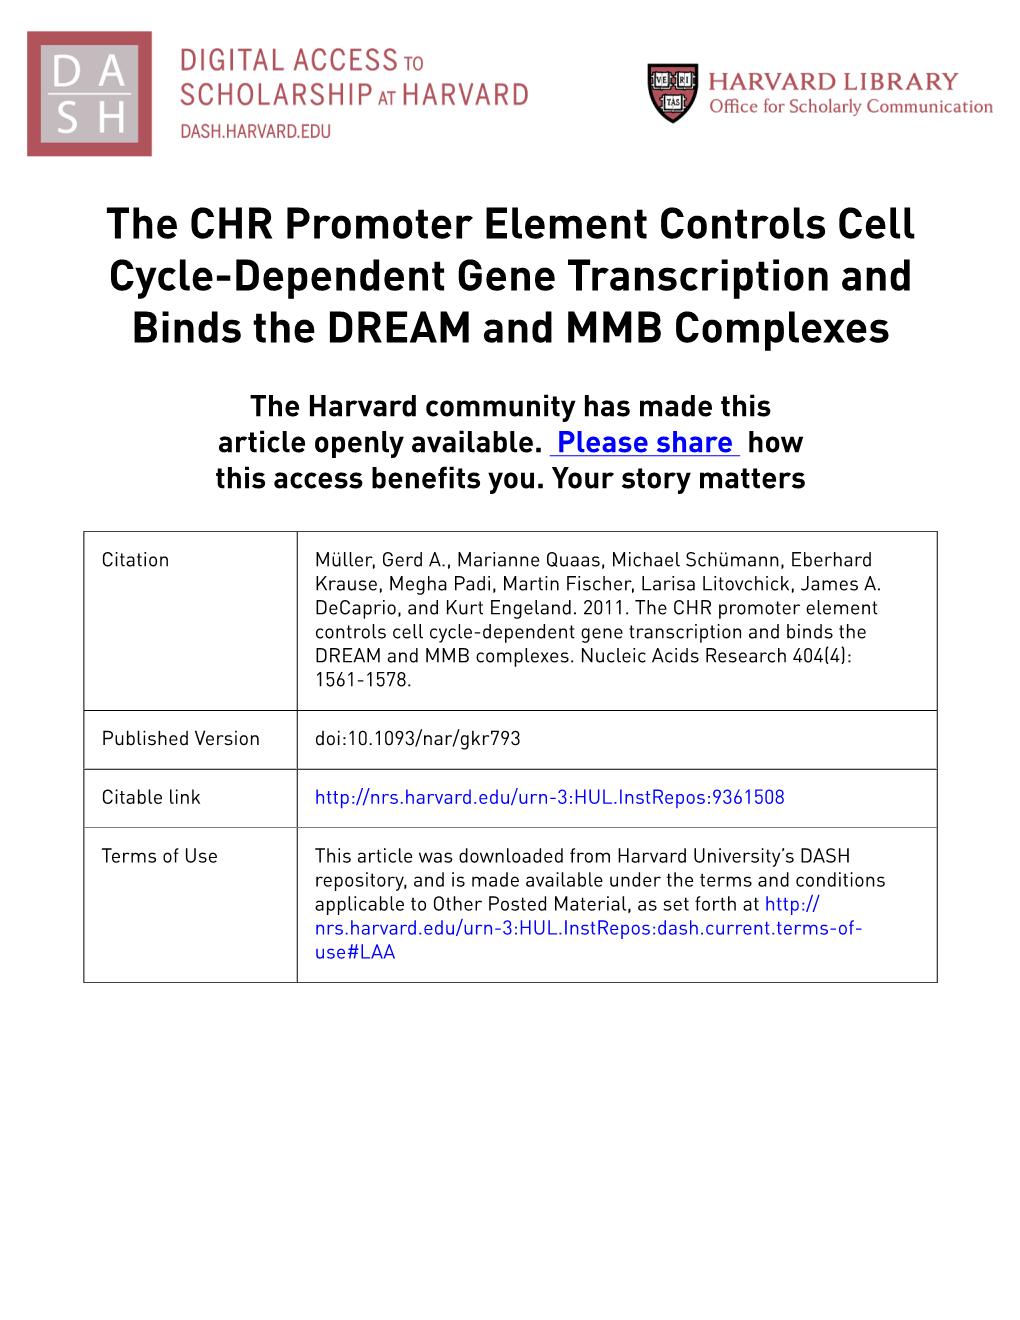 The CHR Promoter Element Controls Cell Cycle-Dependent Gene Transcription and Binds the DREAM and MMB Complexes